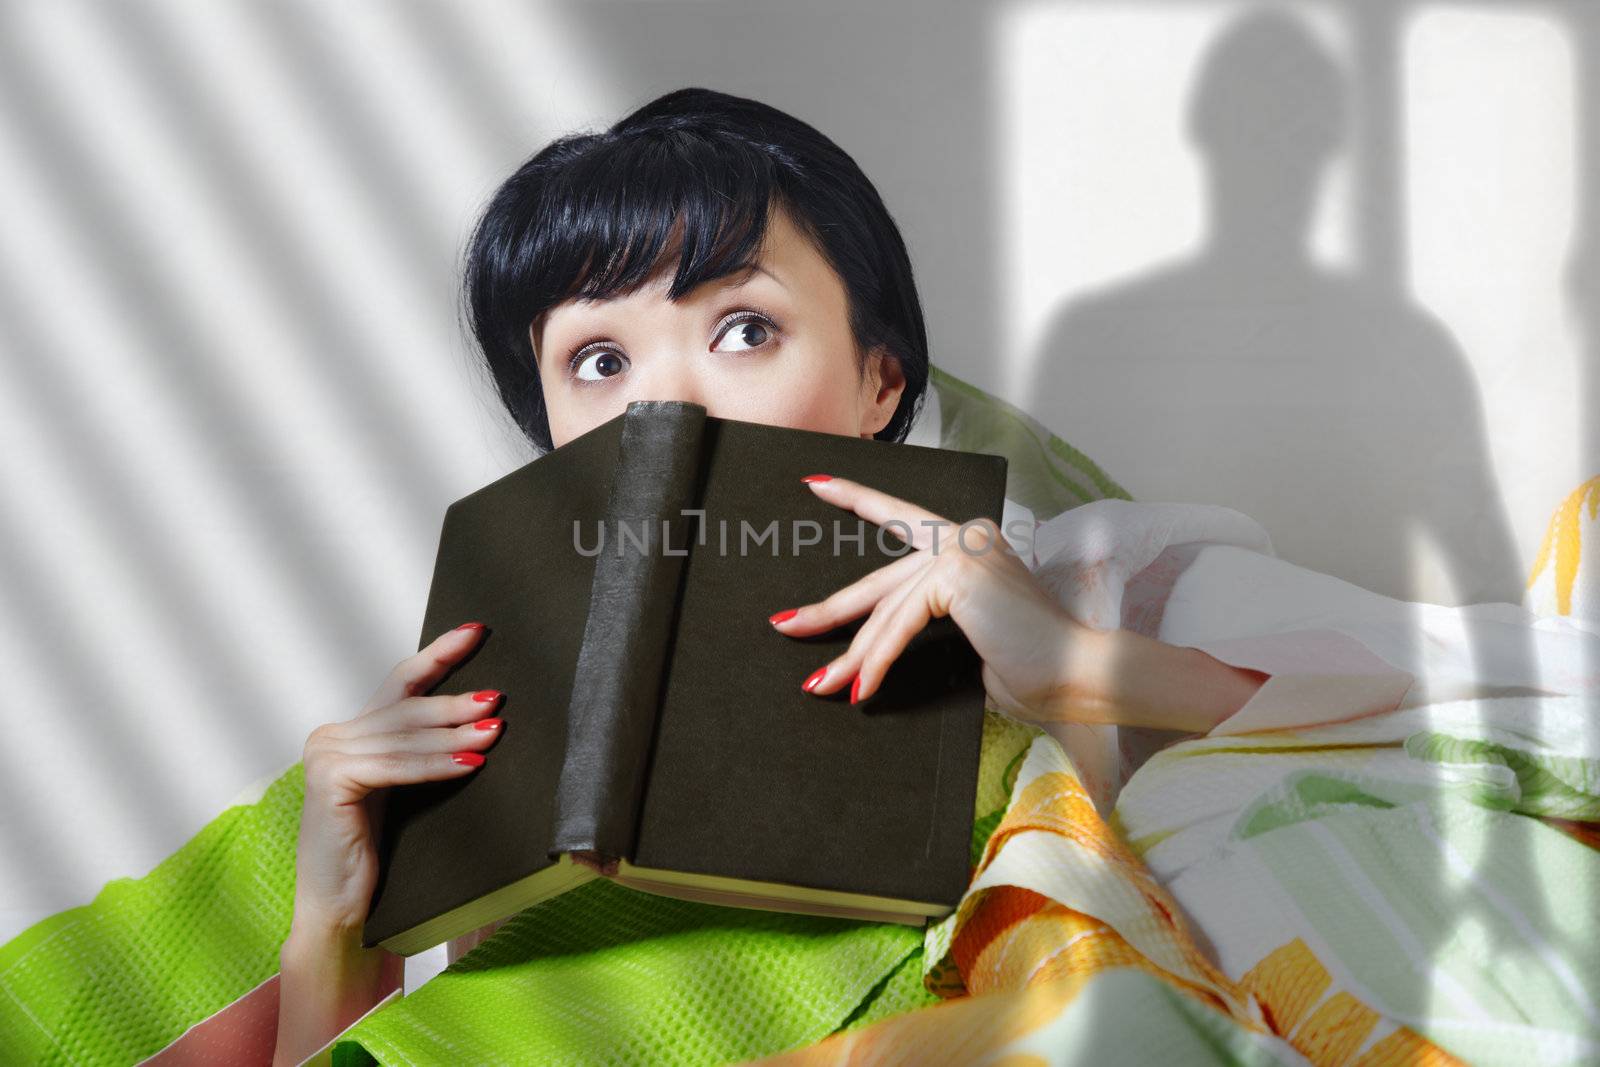 Afraid lady with book indoors looking to somebody. Shade of somebody is on the wall